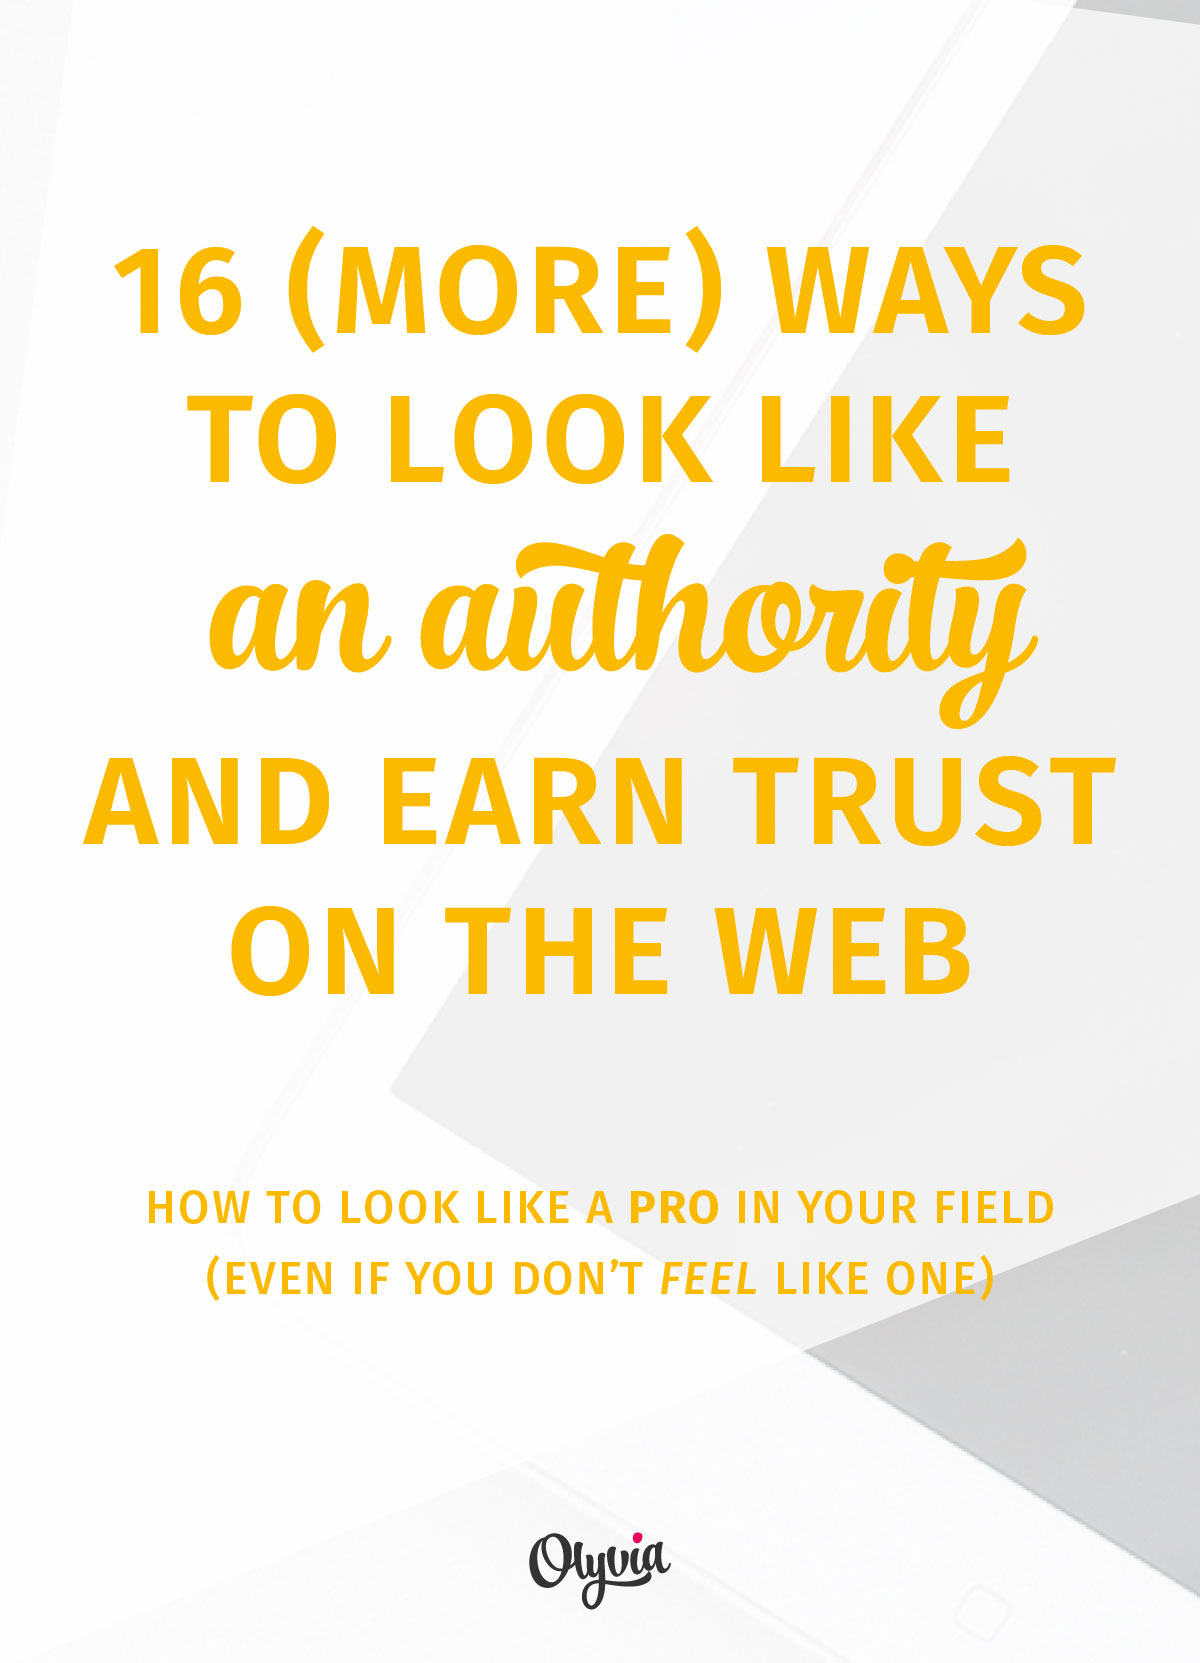 16 ways to look like an authority and build trust on the web + a free worksheet!